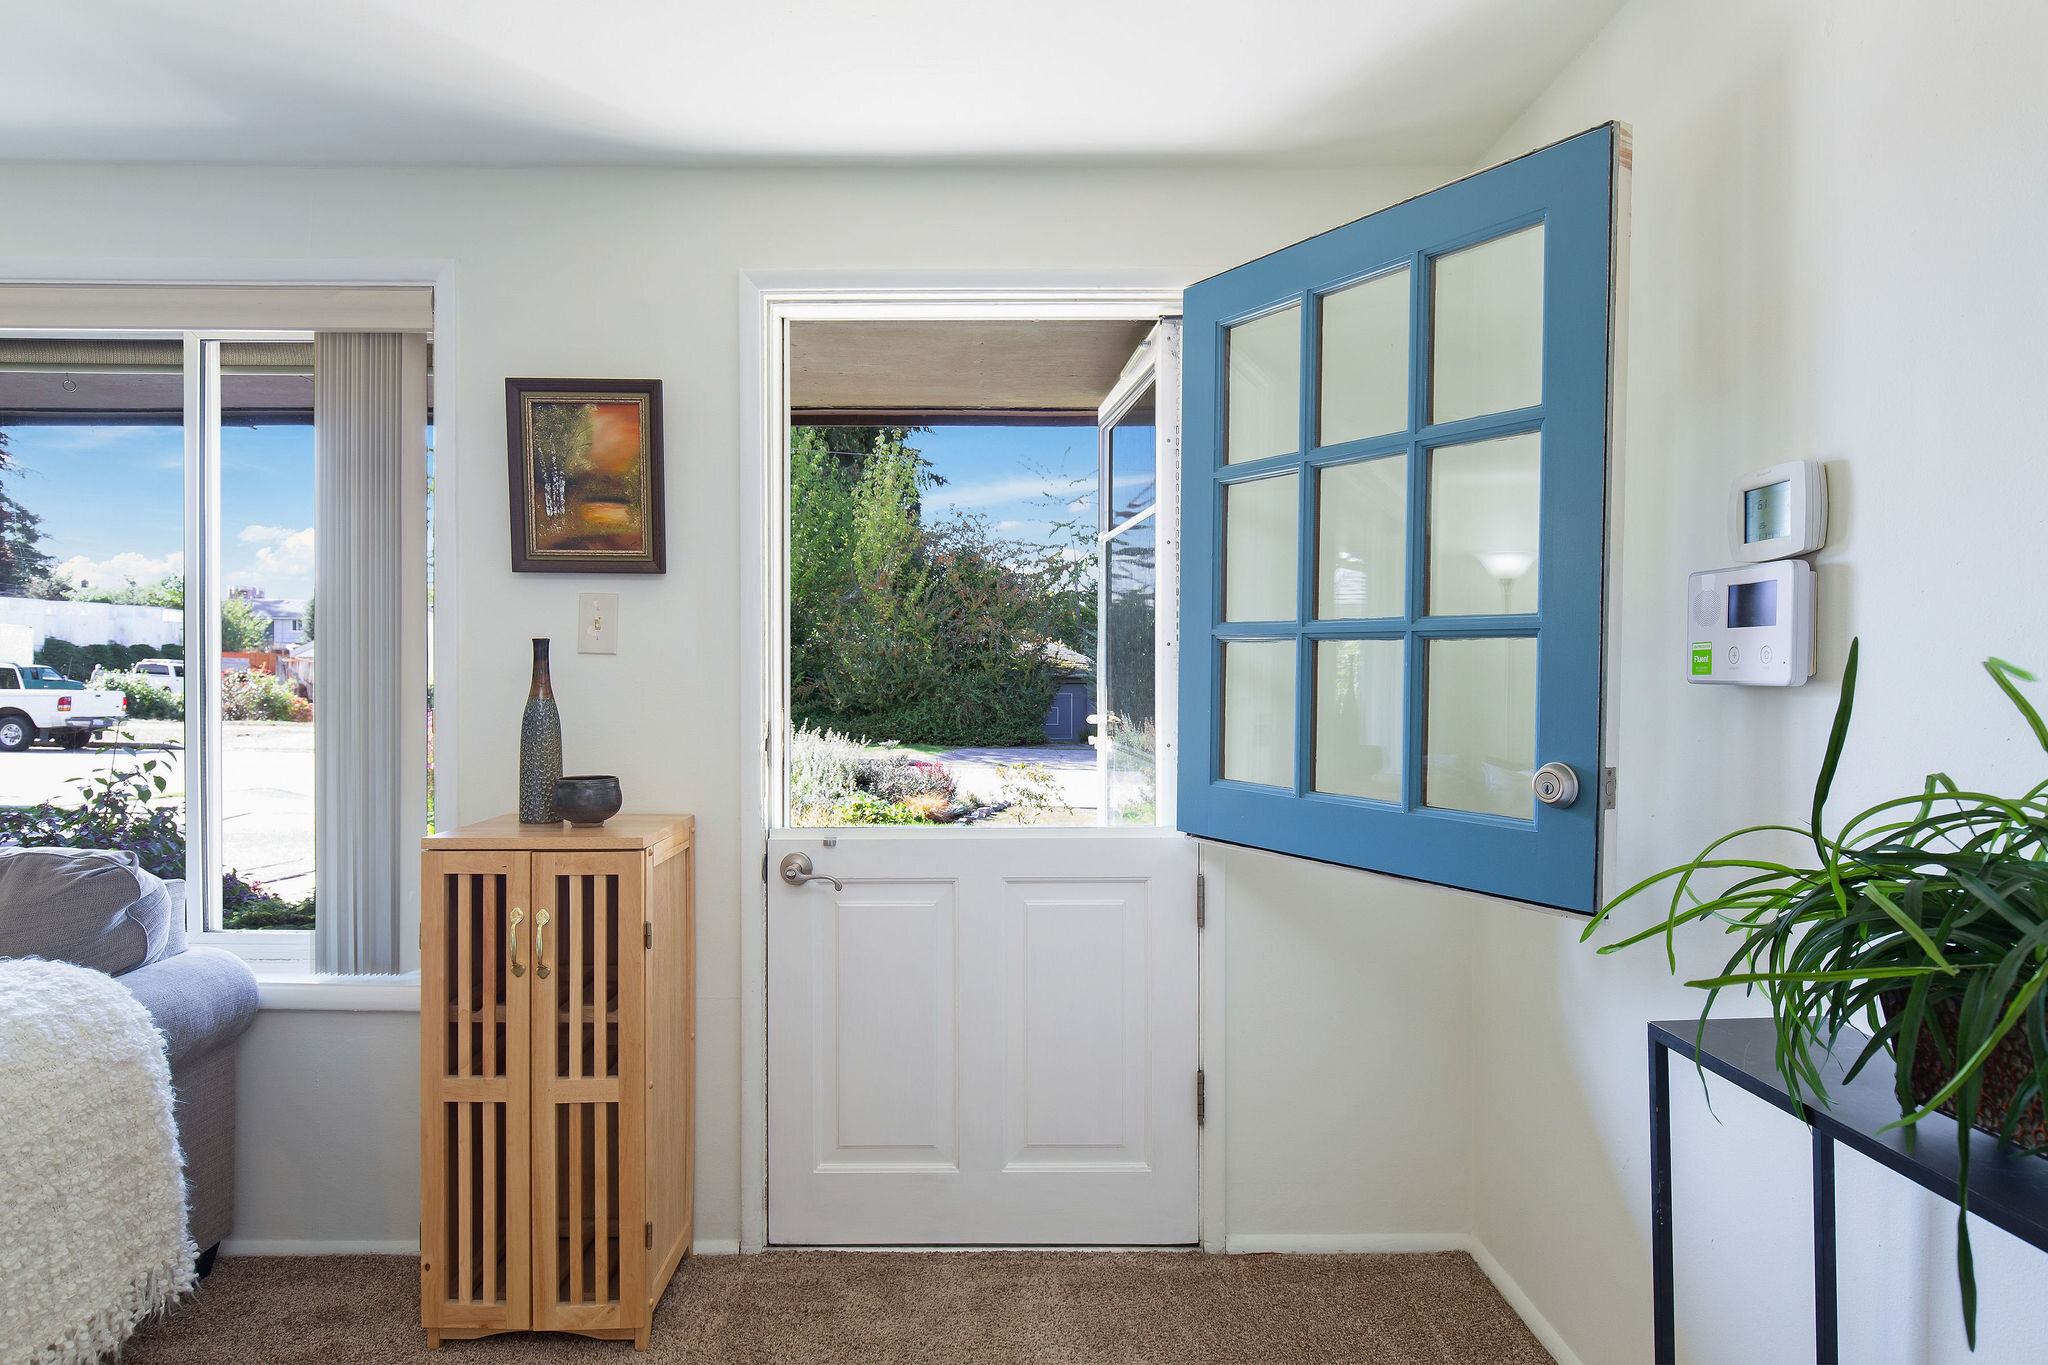  Fun dutch door to bring in fresh air to the home and chat with the great neighbors. 